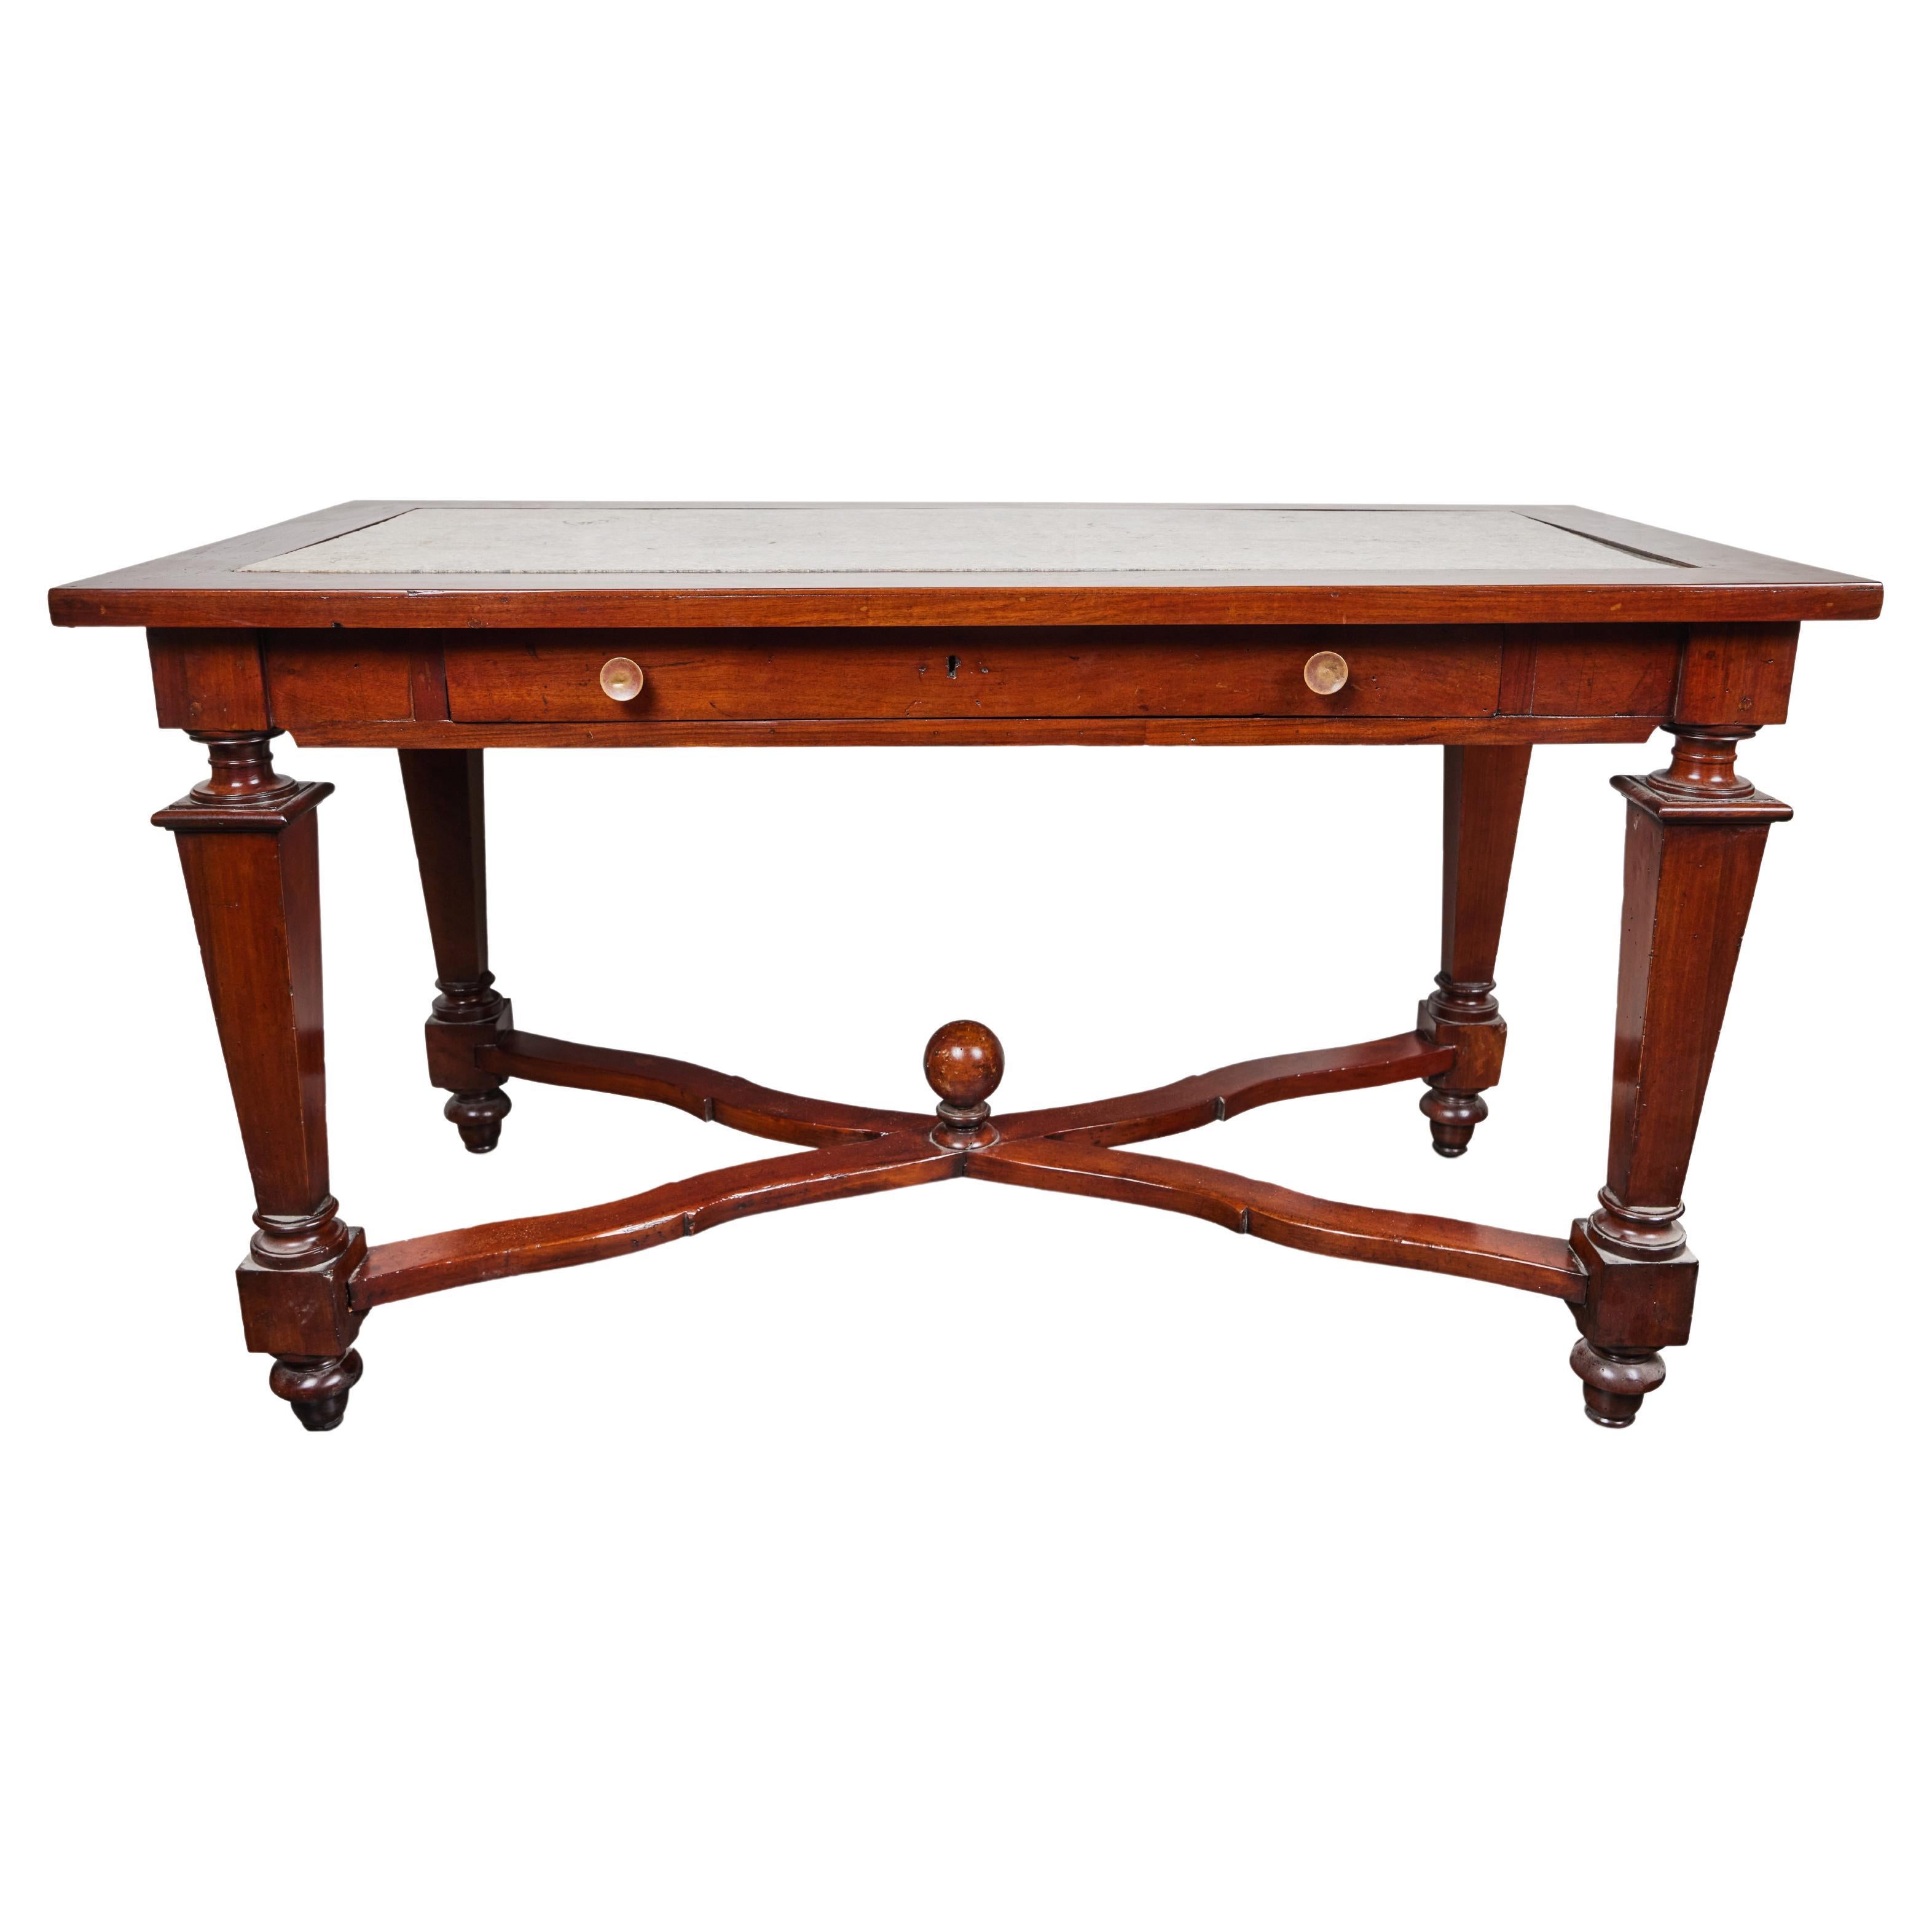 c. 1780 Tuscan Console Table For Sale